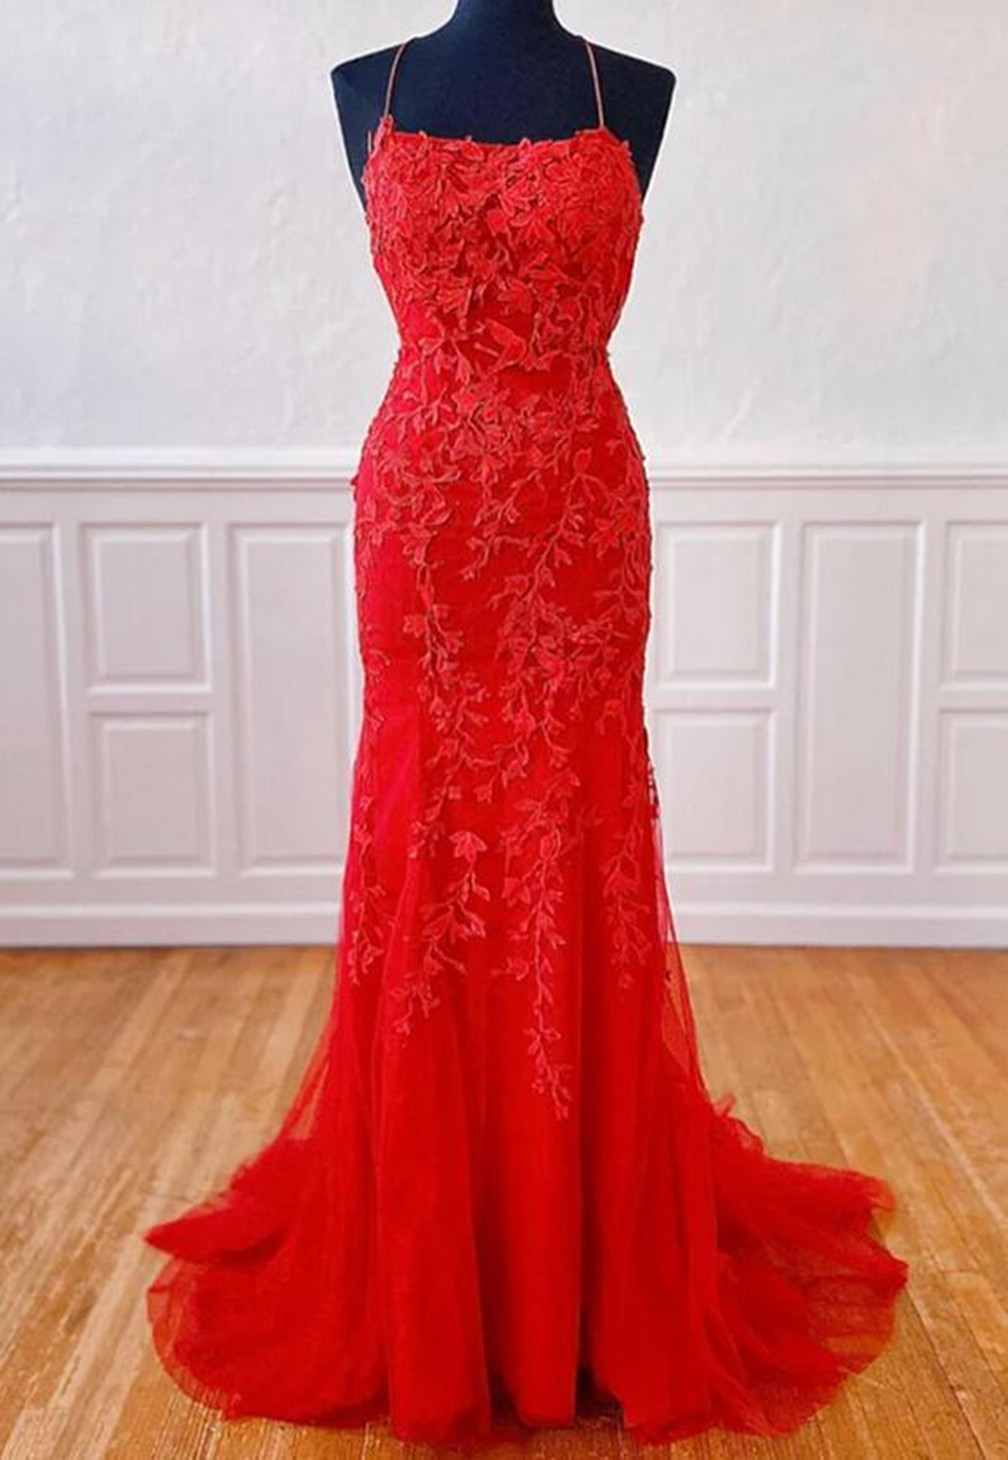 Women Spaghetti Strap Lace Prom Dresses Long Appliques Evening Party Gowns Sleeveless Formal Dress Yp052